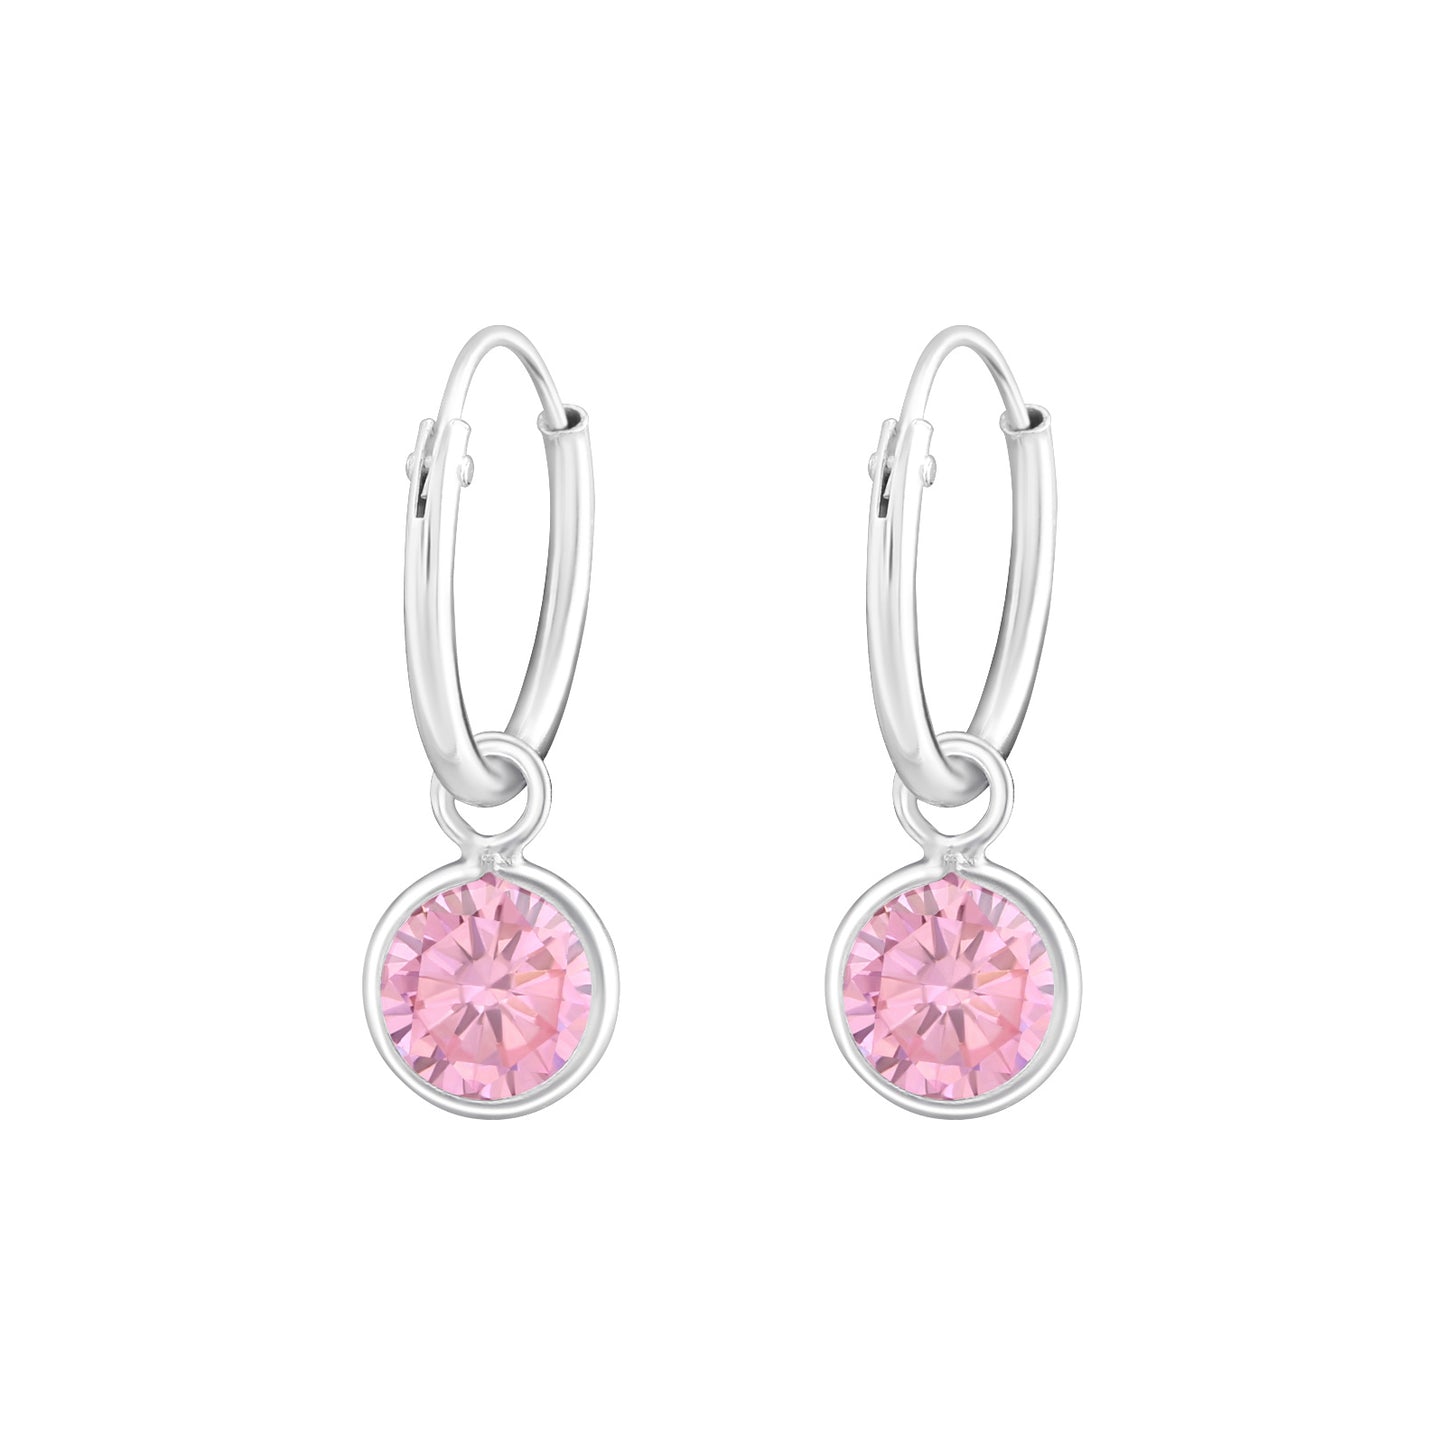 Sterling Silver Huggie Earrings - with Cubic Zirconia Crystals